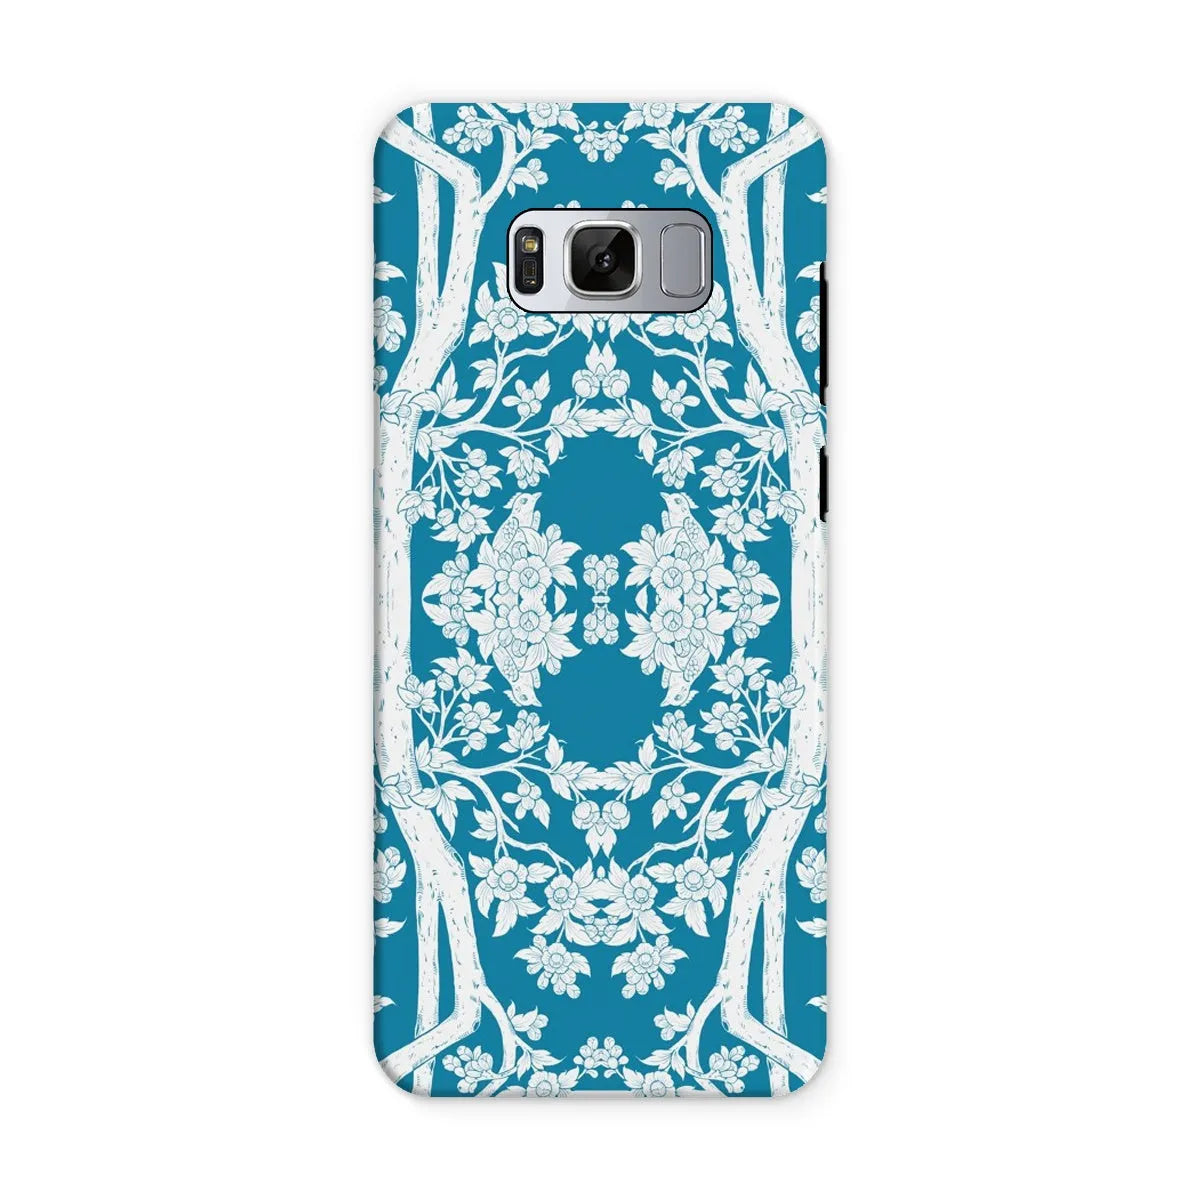 Aviary Blue Aesthetic Pattern Art Phone Case - Samsung Galaxy S8 / Matte - Mobile Phone Cases - Aesthetic Art